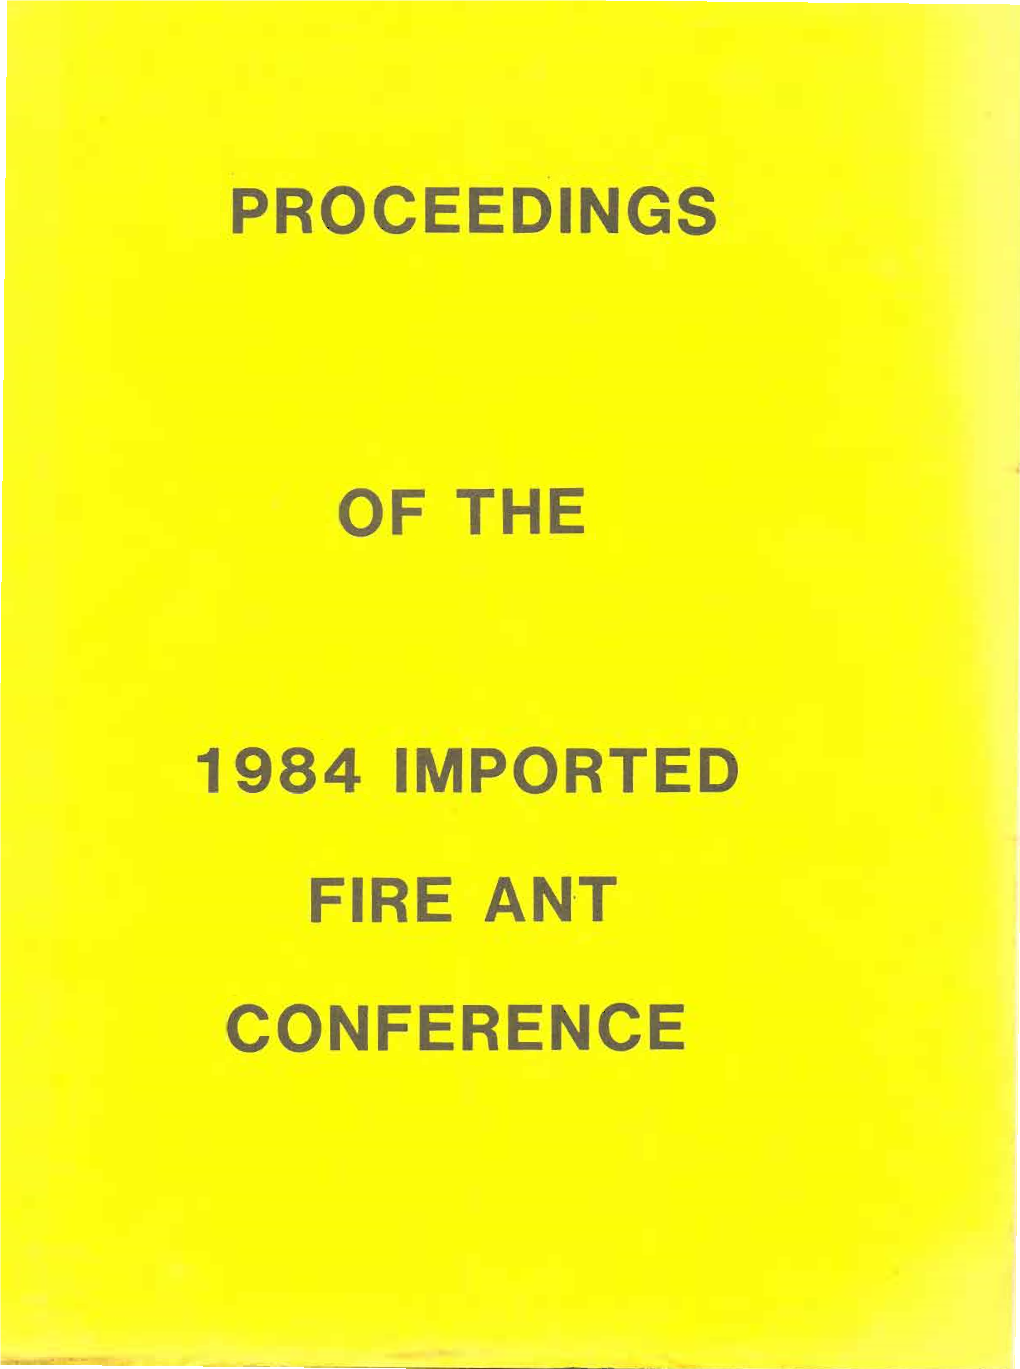 1984 Imported Fire Ant Conference Proceedings